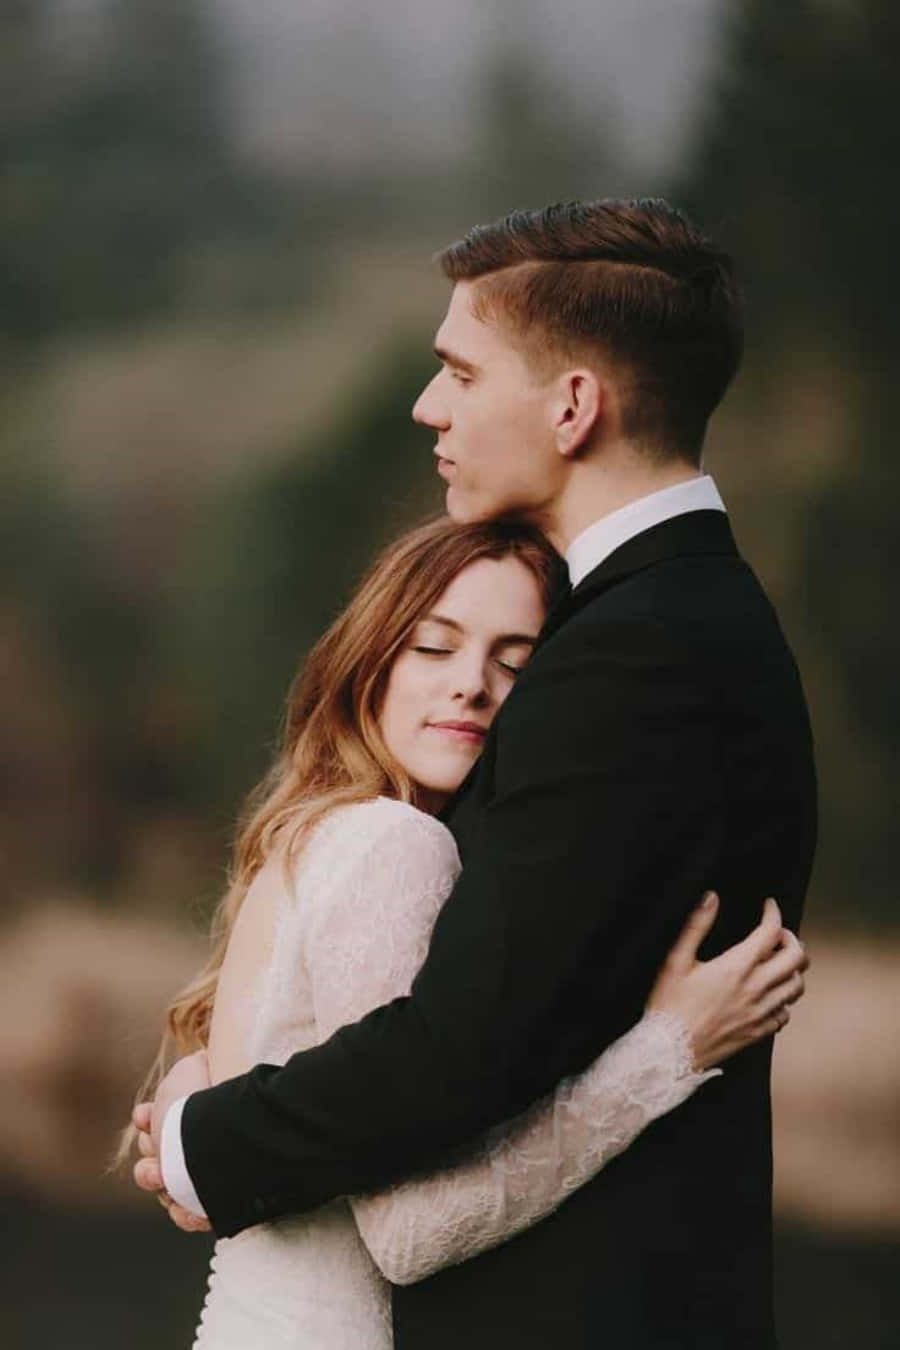 Couples Hugging Wedding Photoshoot Picture